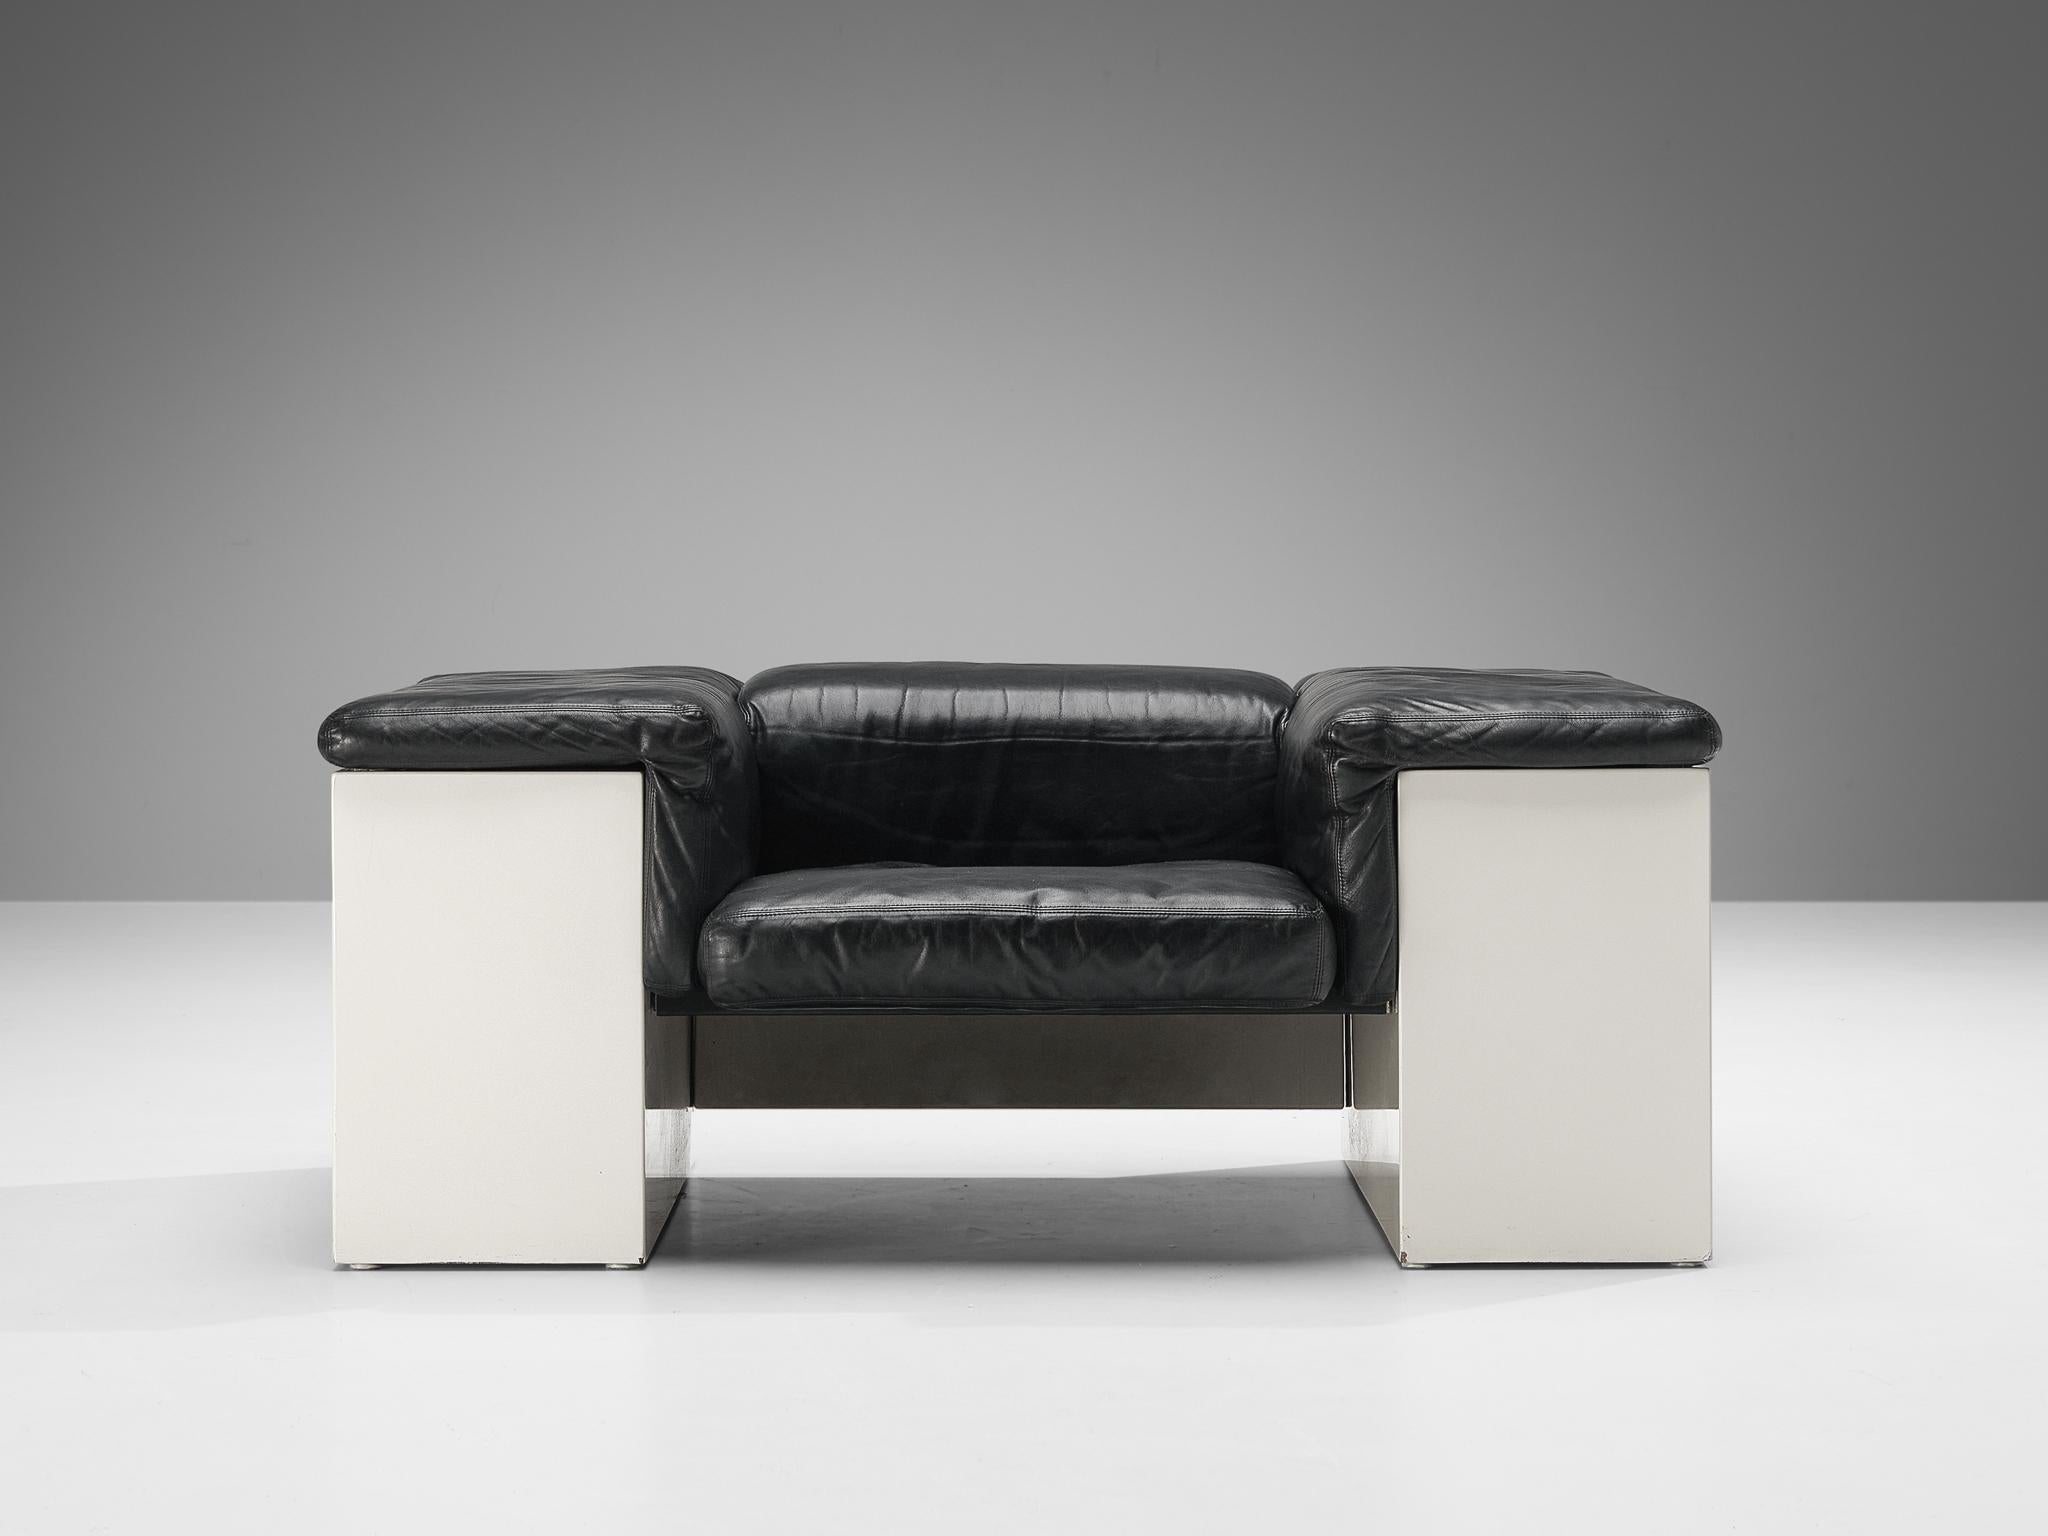 Cini Boeri for Knoll 'Brigadiere' Living Room Set in Black Leather  For Sale 2